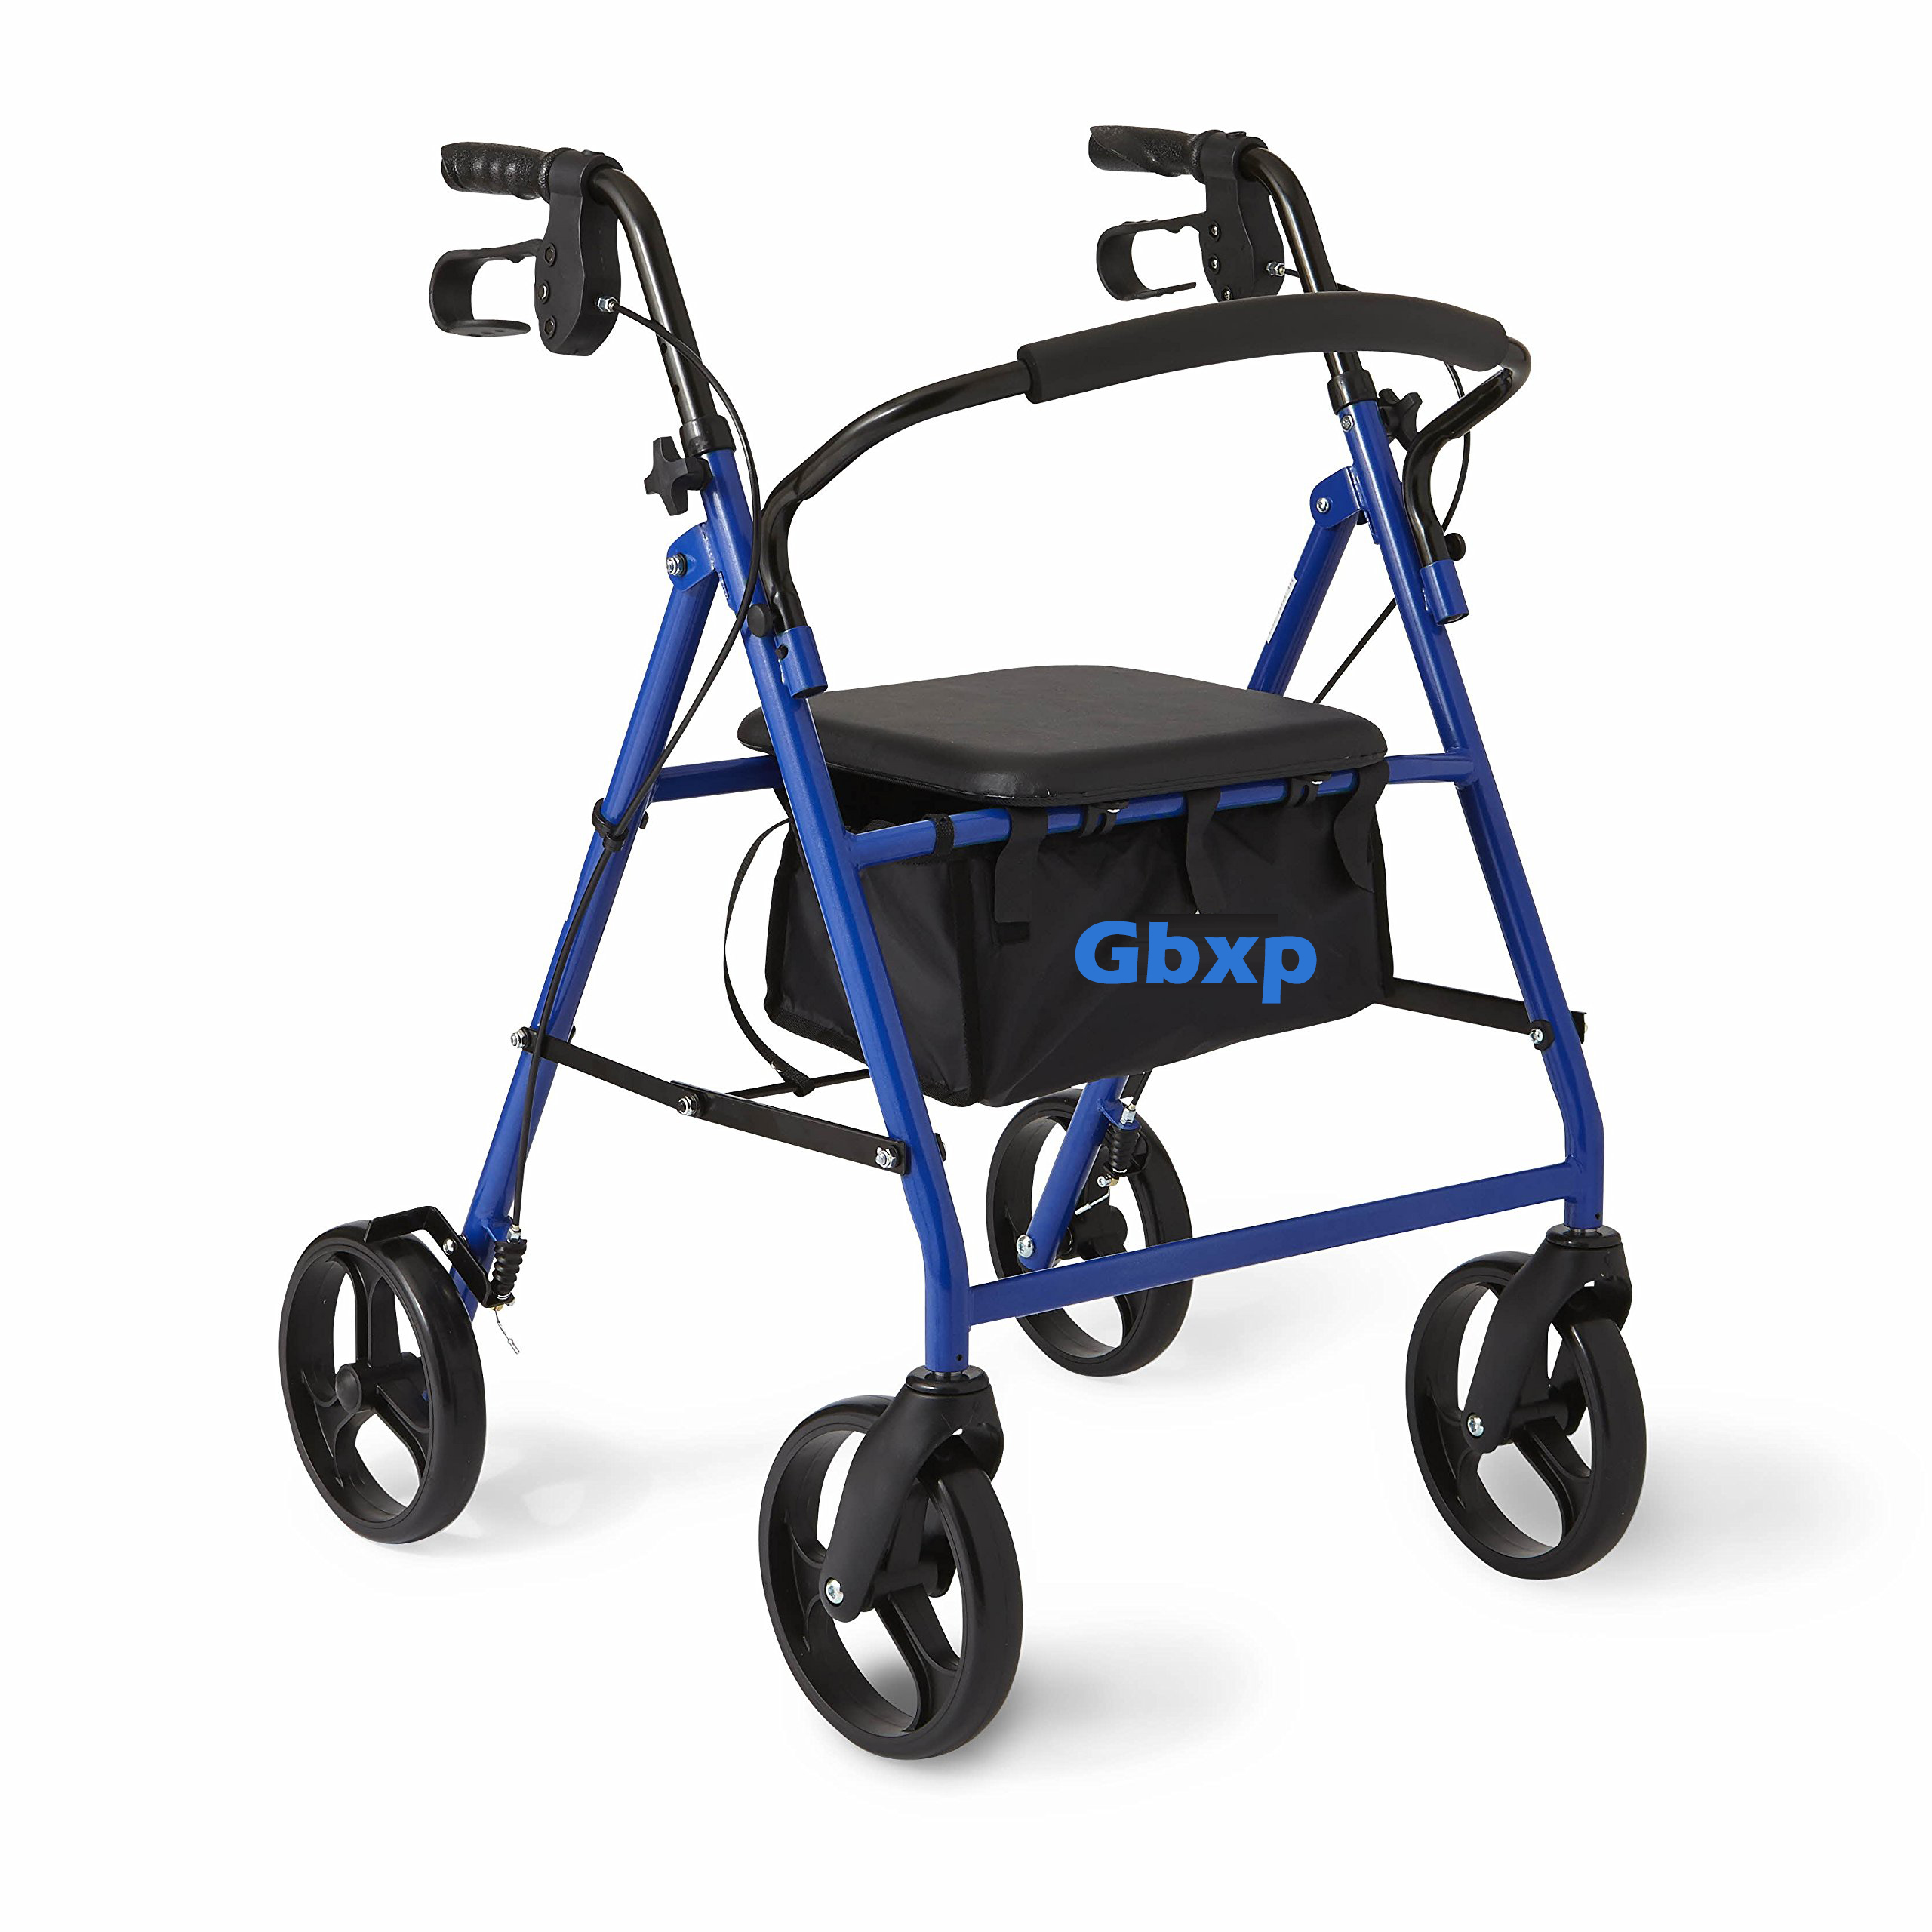 Gbxp Medline Standard Steel Folding Rollator Walker with 8″ Wheels, Supports up to 350 lbs, Blue